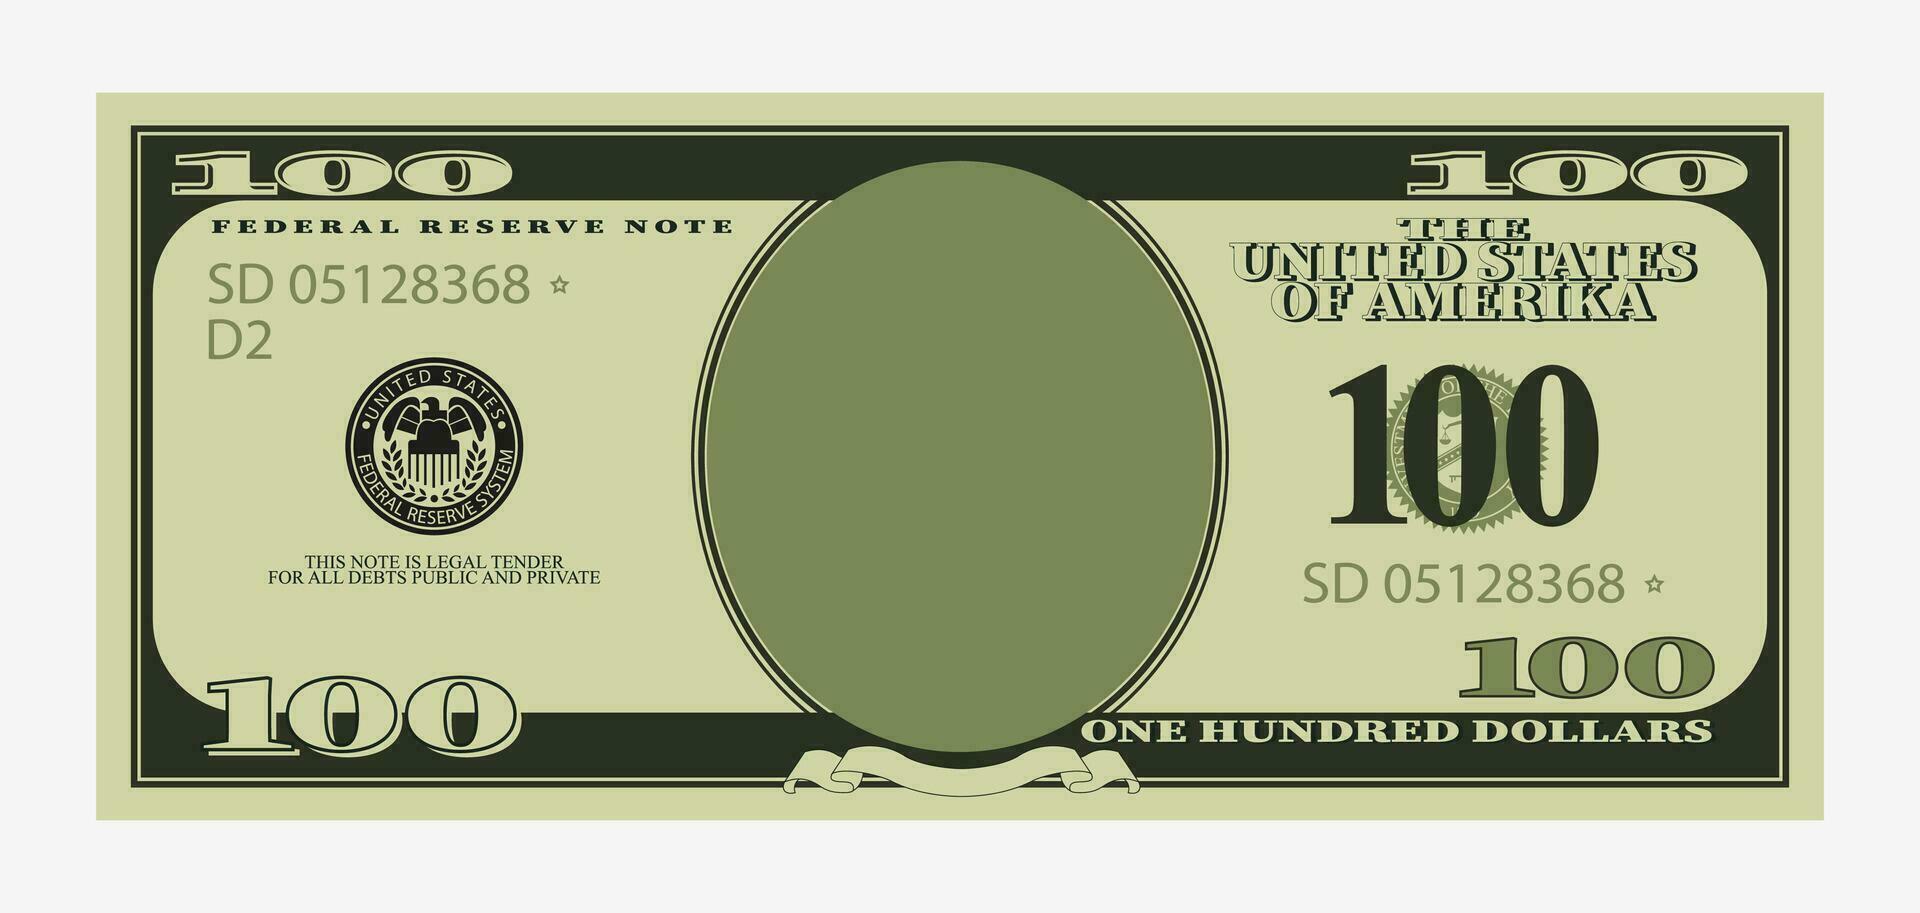 One hundred dollars bill template. American banknote with empty portrait center paper money economic investment vector template for inserting your face drawing.